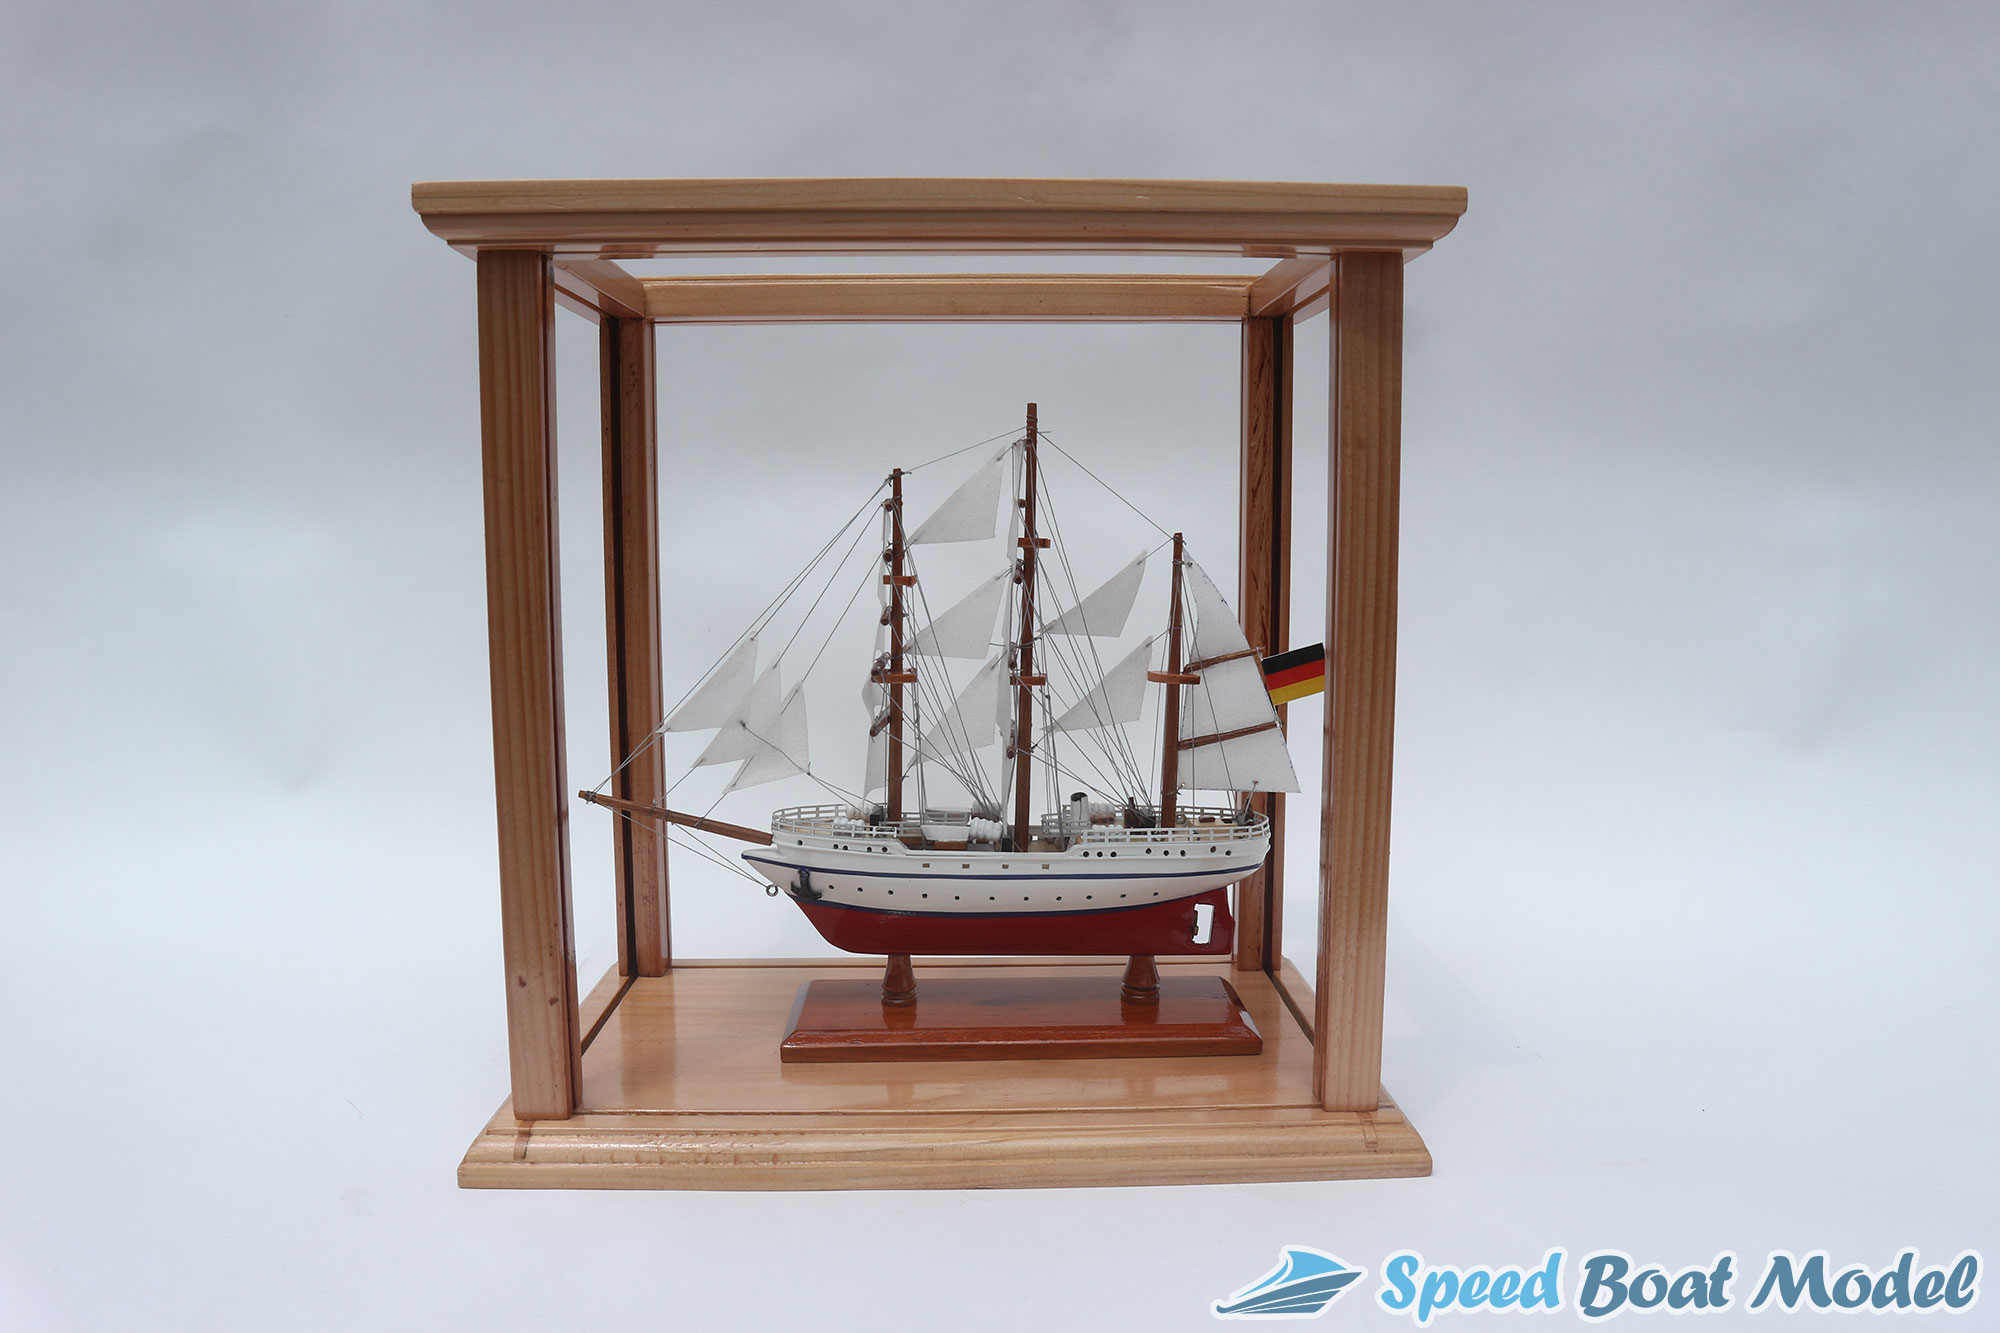 With Display Case With Gorch Fock Ii Tall Ship Model (2)